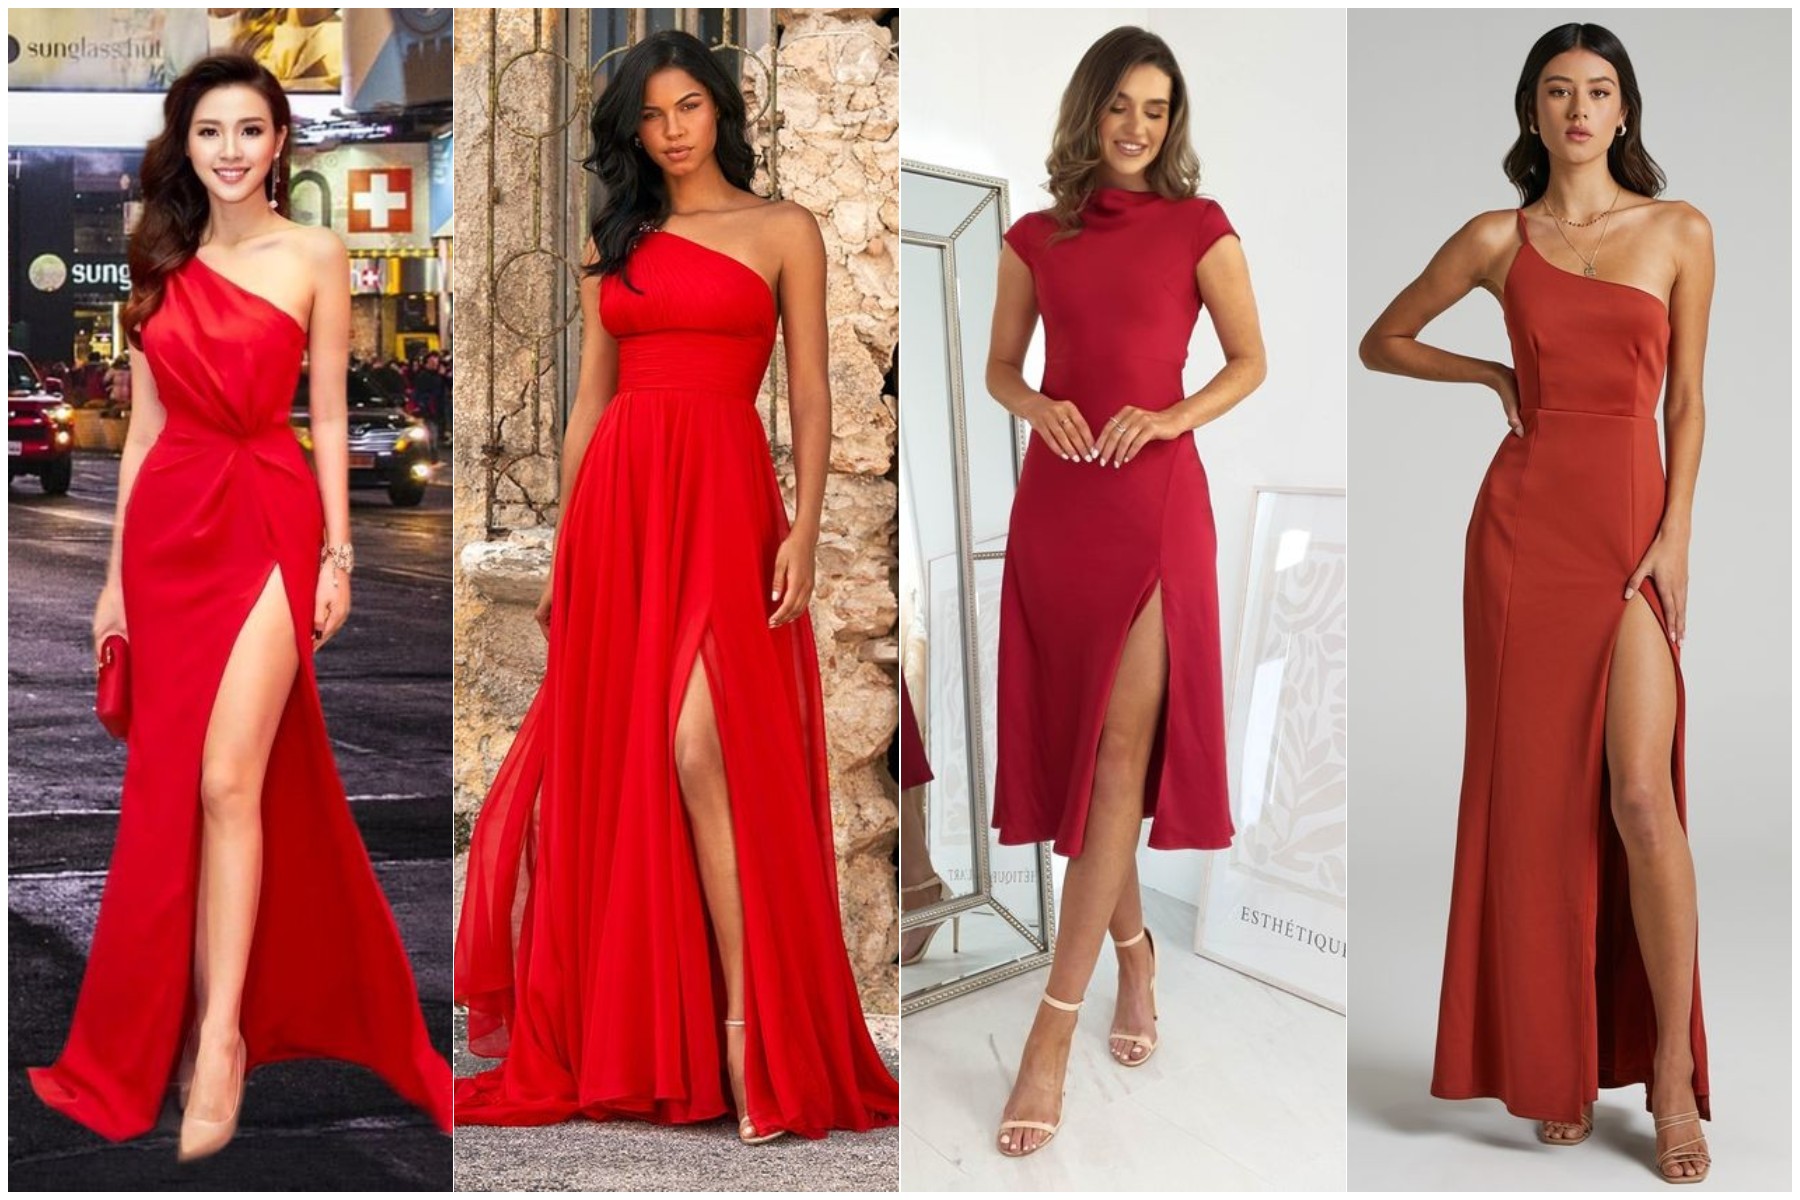 what color shoes to wear with red formal dress?